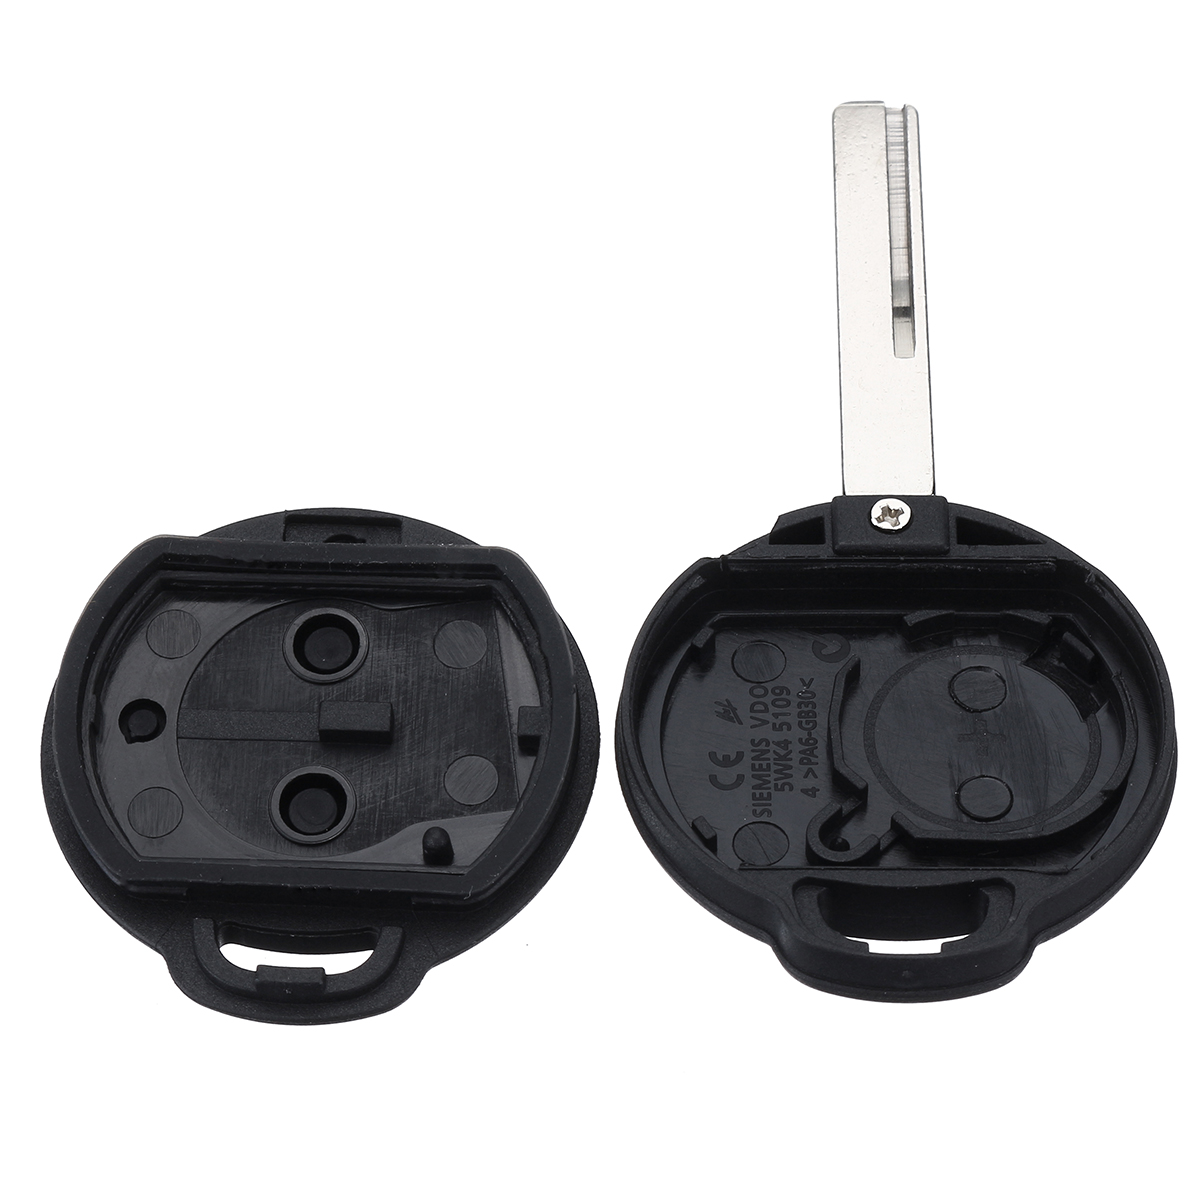 2-Buttons-Remote-Key-Case-Fob-Shell-For-Benz-Mercedes-Smart-Forfour-1323305